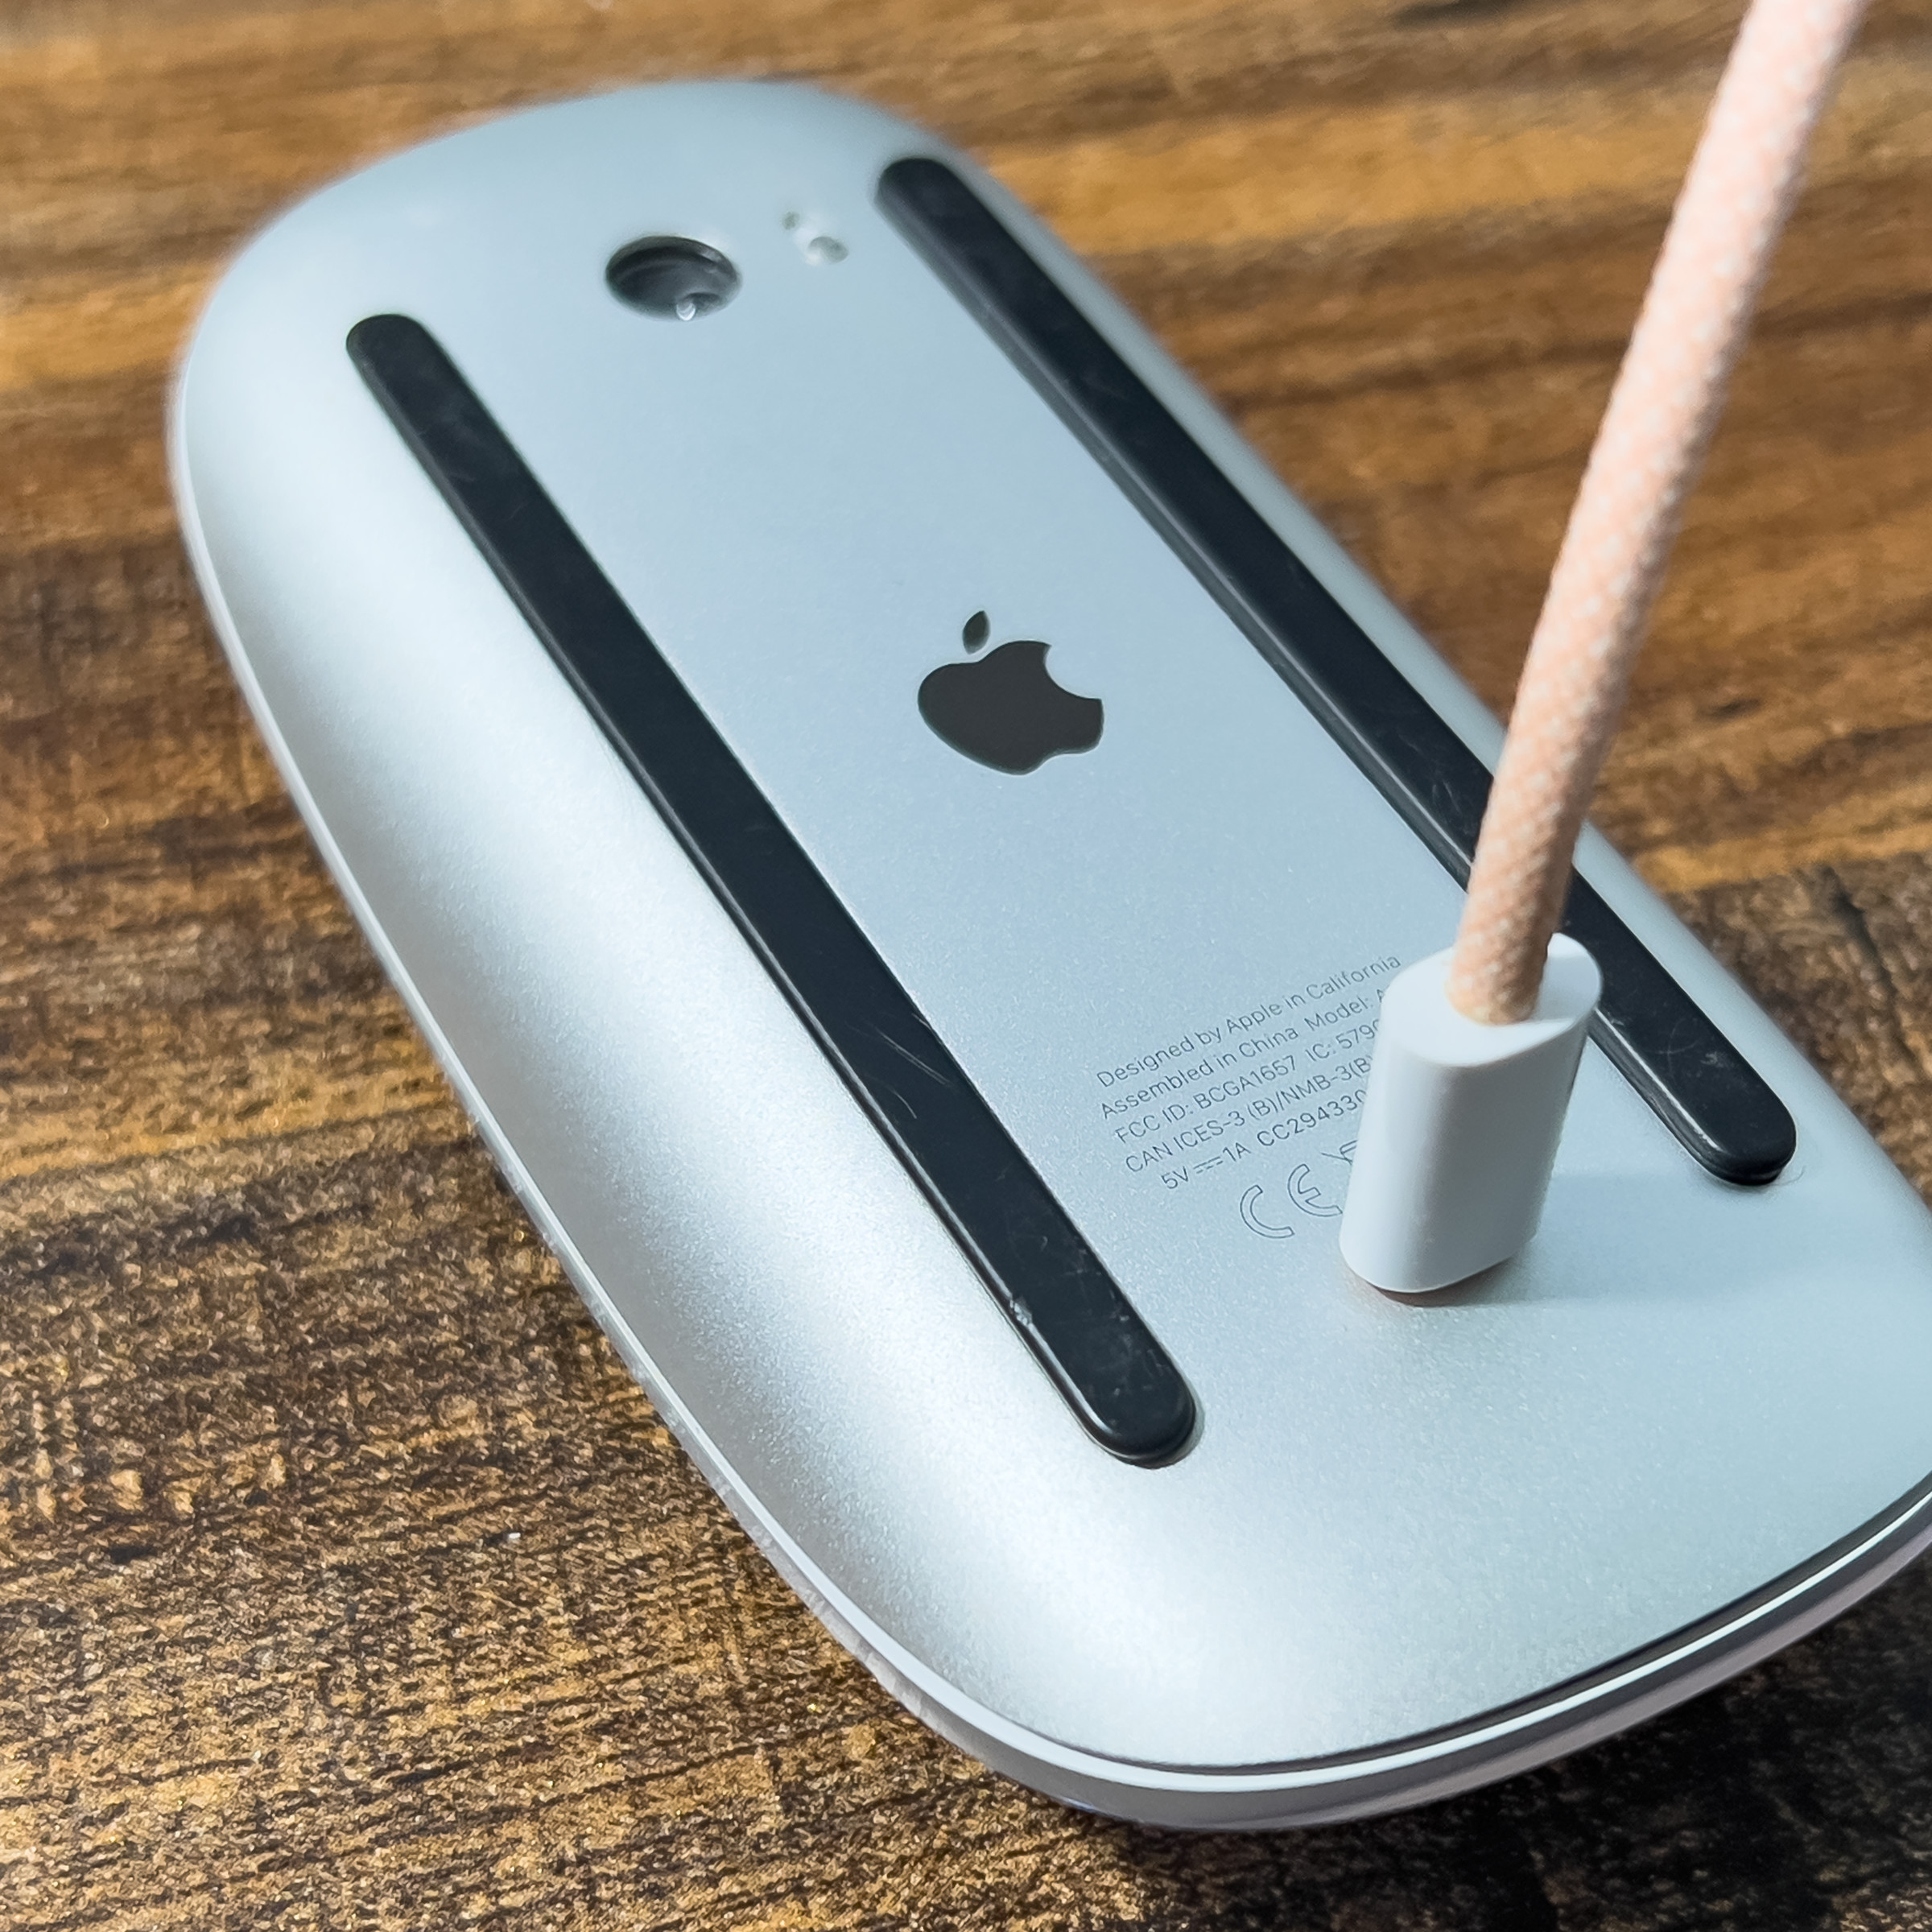 A picture of a Magic Mouse laying on its back with a lightning cable plugged into it.